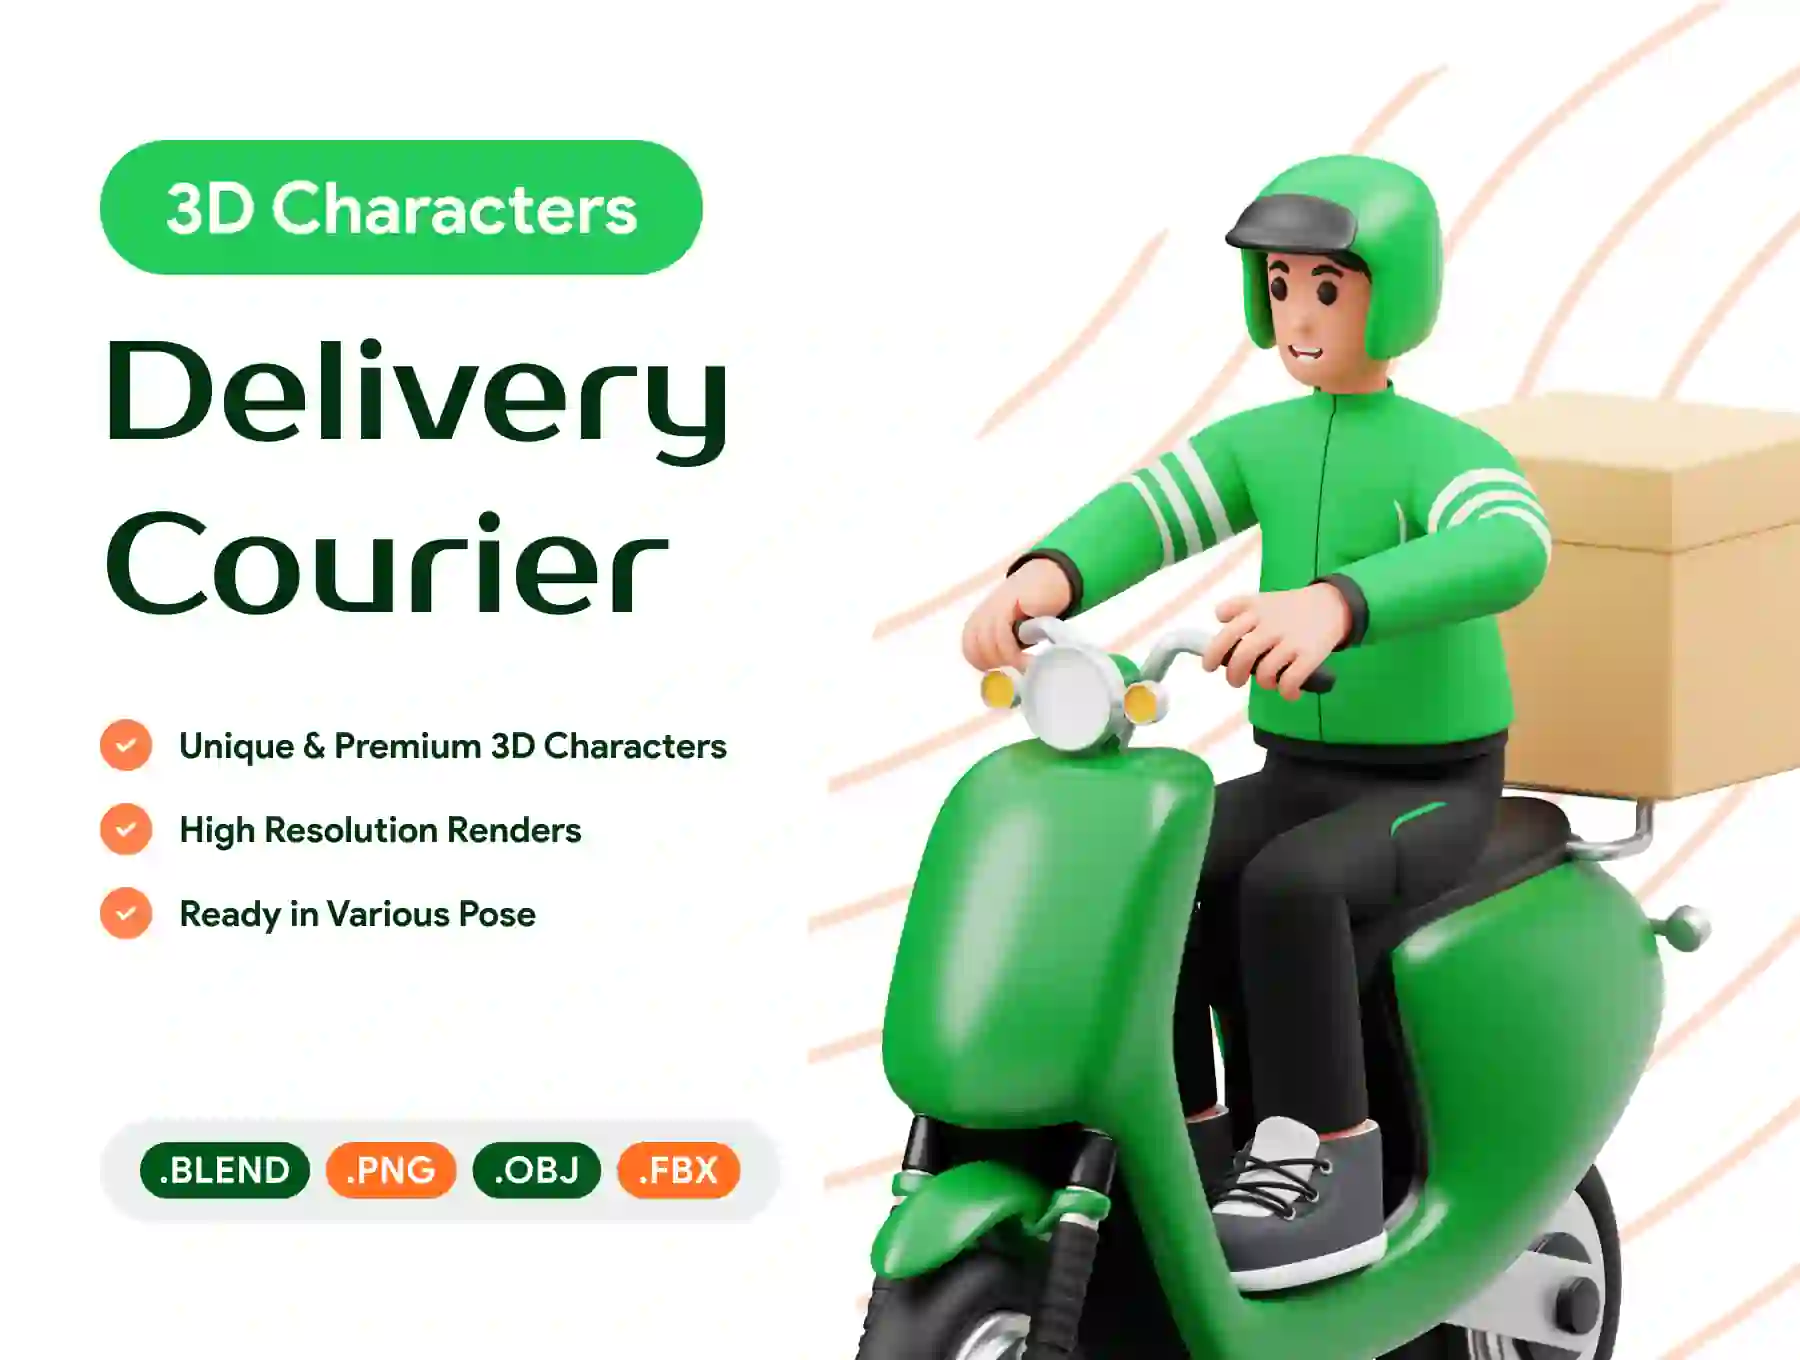 Delivery Courier 3D Character Illustration